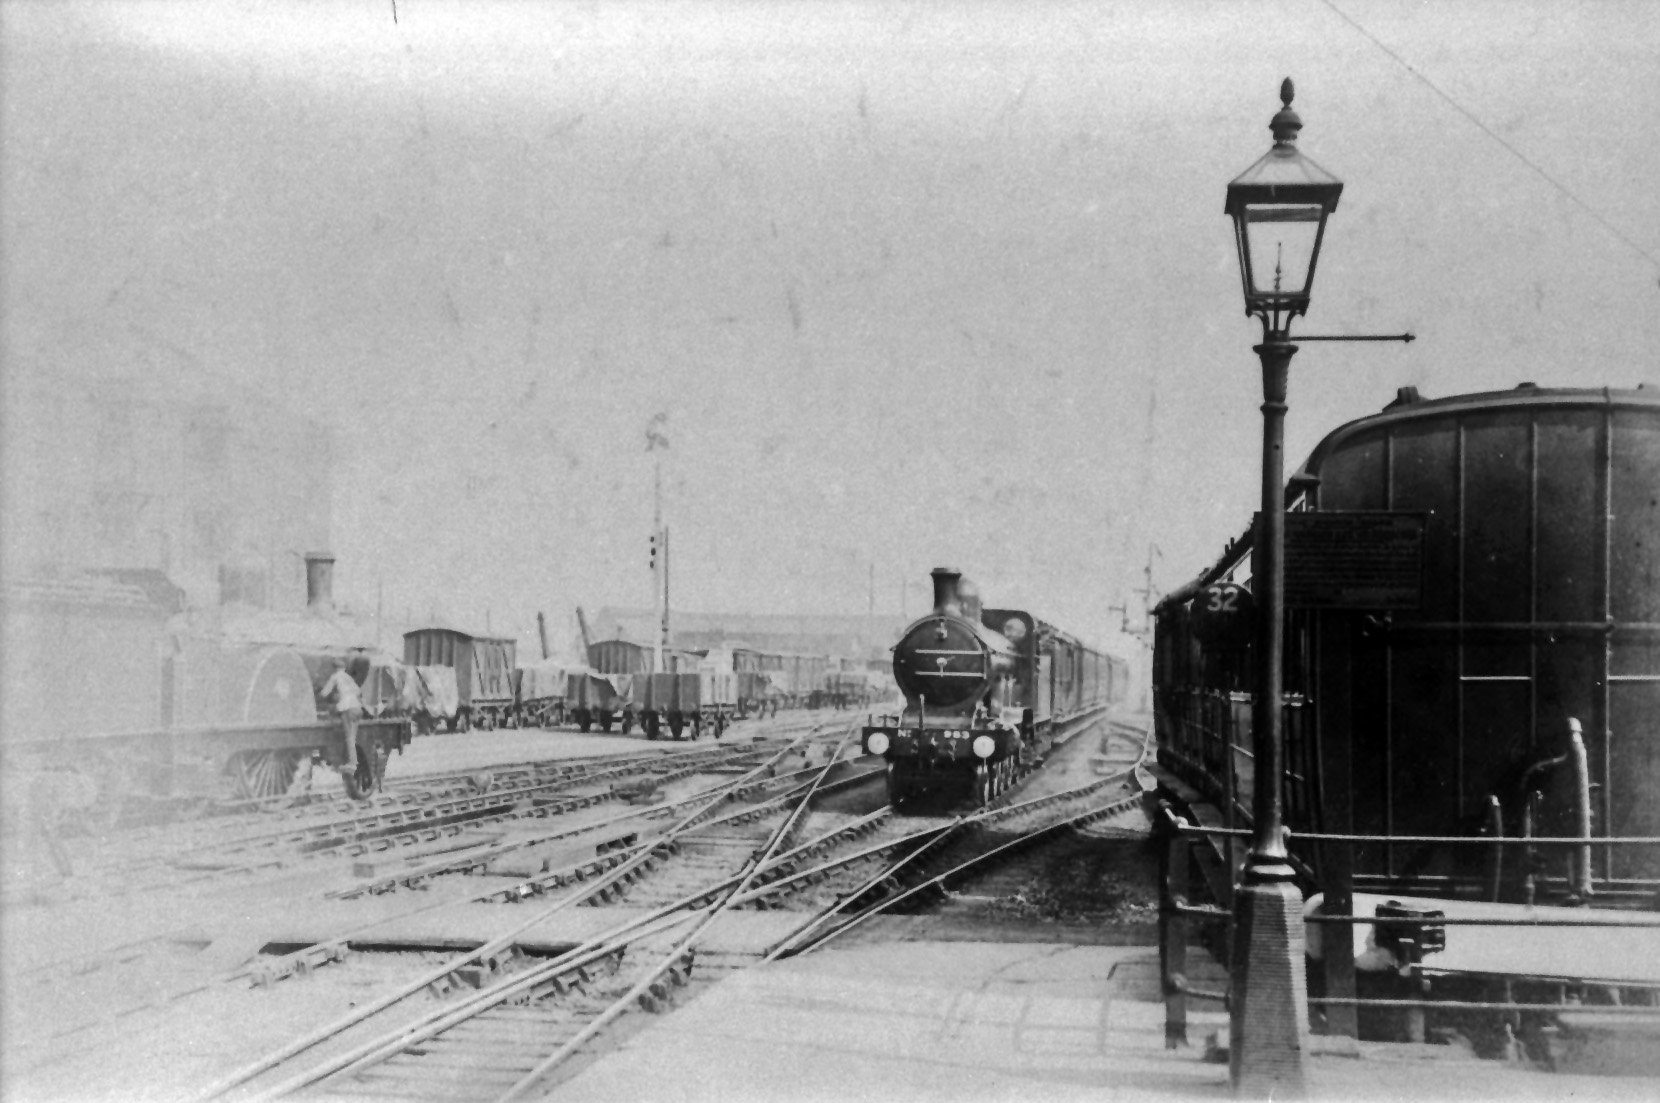 In this view of 17th June 1902 looking south Grantham Yard signal box is just off shot to the left. On the left are the two locomotive spurs, with shallow pits to assist inspection and oiling round, where locomotive No. 877 is waiting to take over a southbound passenger train. To the left of the approaching northbound express is a series of crossings which link, in receding order, the Down and Up Main lines to the Up Goods line and the goods yard sidings. The northbound express is approaching on the Down Main line under clear signals, the upper arm controlled by the Yard Box, the lower by the North Box. In the shadow of the coaches on the right is a spindle-mounted disc signal to control shunting movements from the Down Main platform across the connection to the right. It has '32' picked out in white paint - the number of the lever in the Yard Box which operated it. The dock in which the coaches are standing was one of two short sidings, long-standing features of the layout where coaches or vans could be kept in readiness for adding to northbound trains. Photograph by Rev. T.B. Parley from the John Tatchell Collection of the Historical Model Railway Society (HMRS).